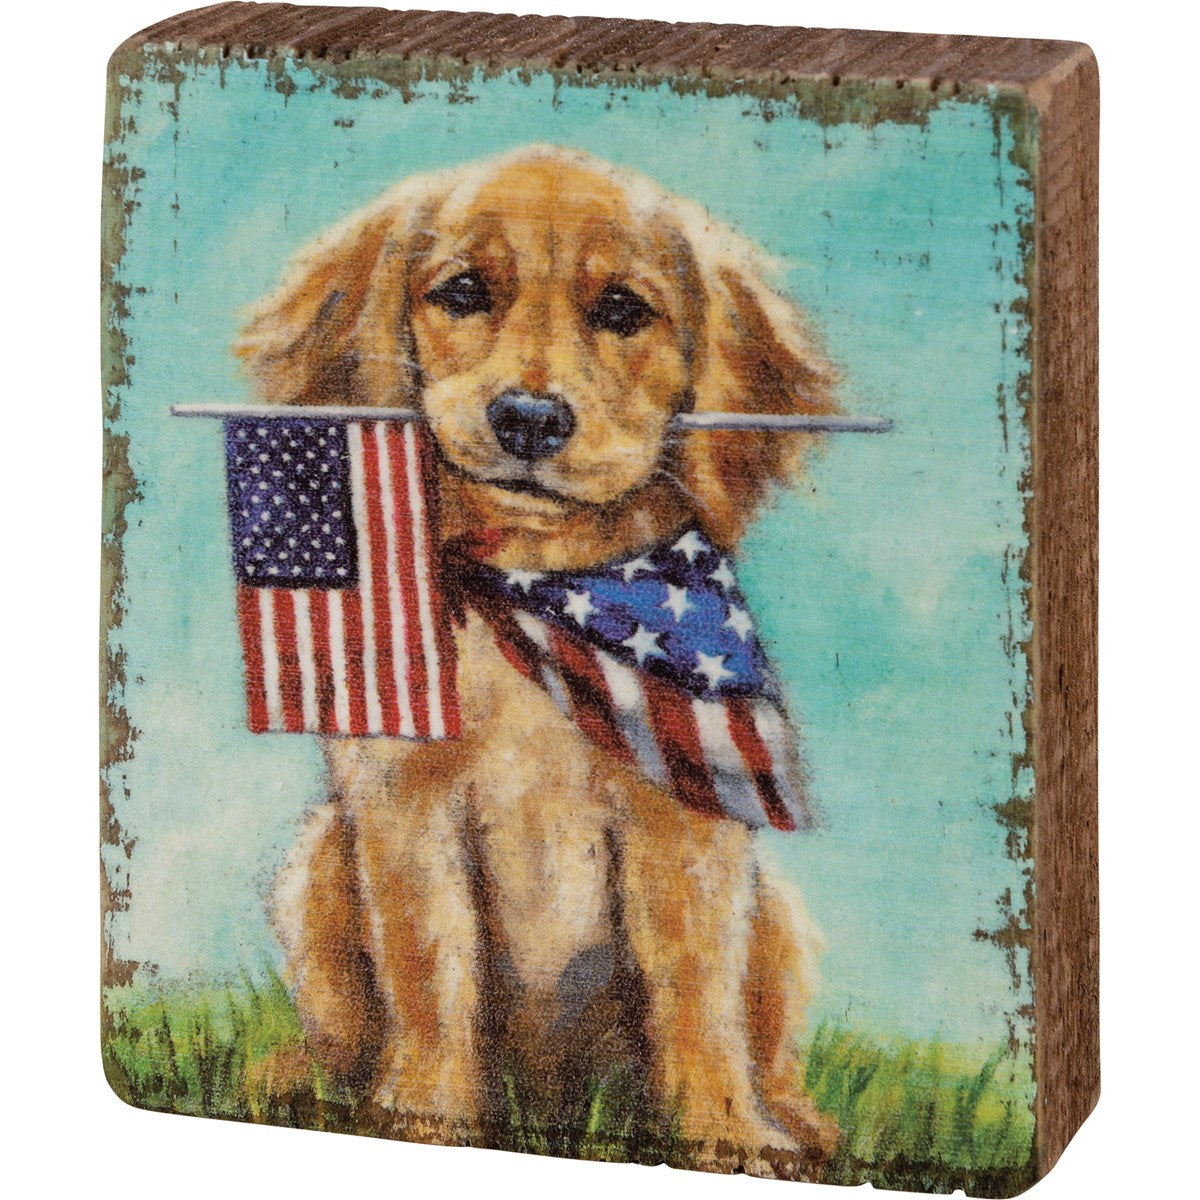 Golden Retriever Dog With American Flag Small Box Sign